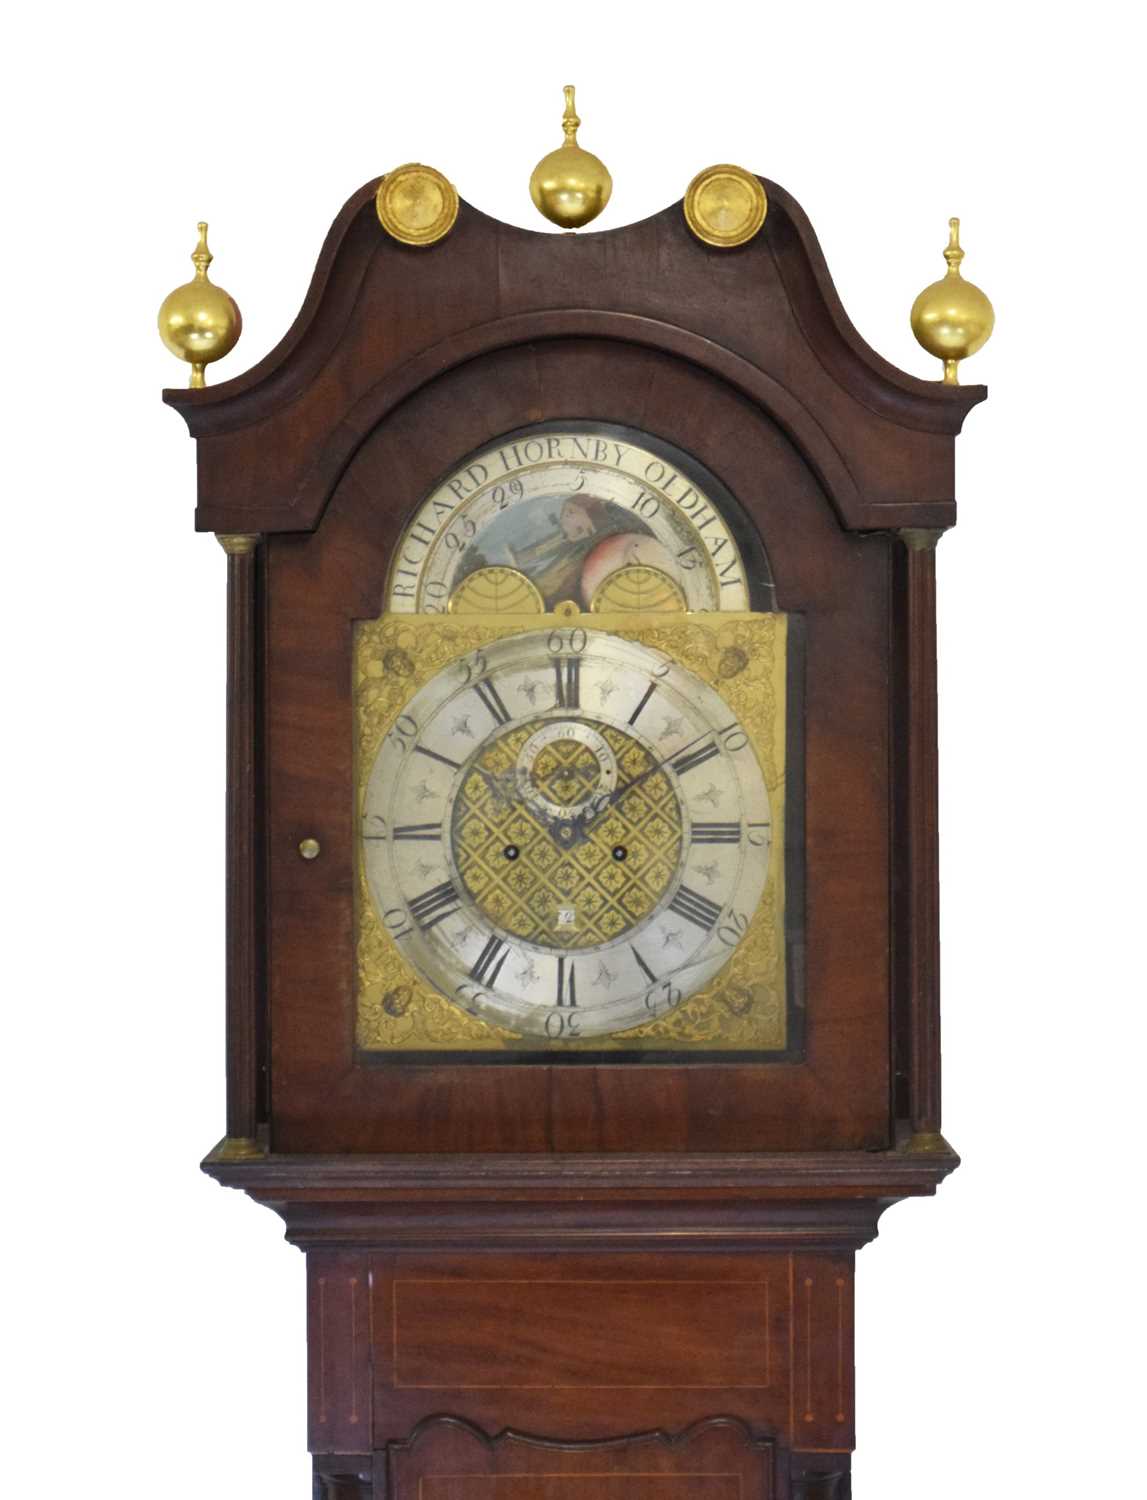 Early 19th Century inlaid mahogany cased 8-day brass dial longcase clock - Richard Hornby, Oldham